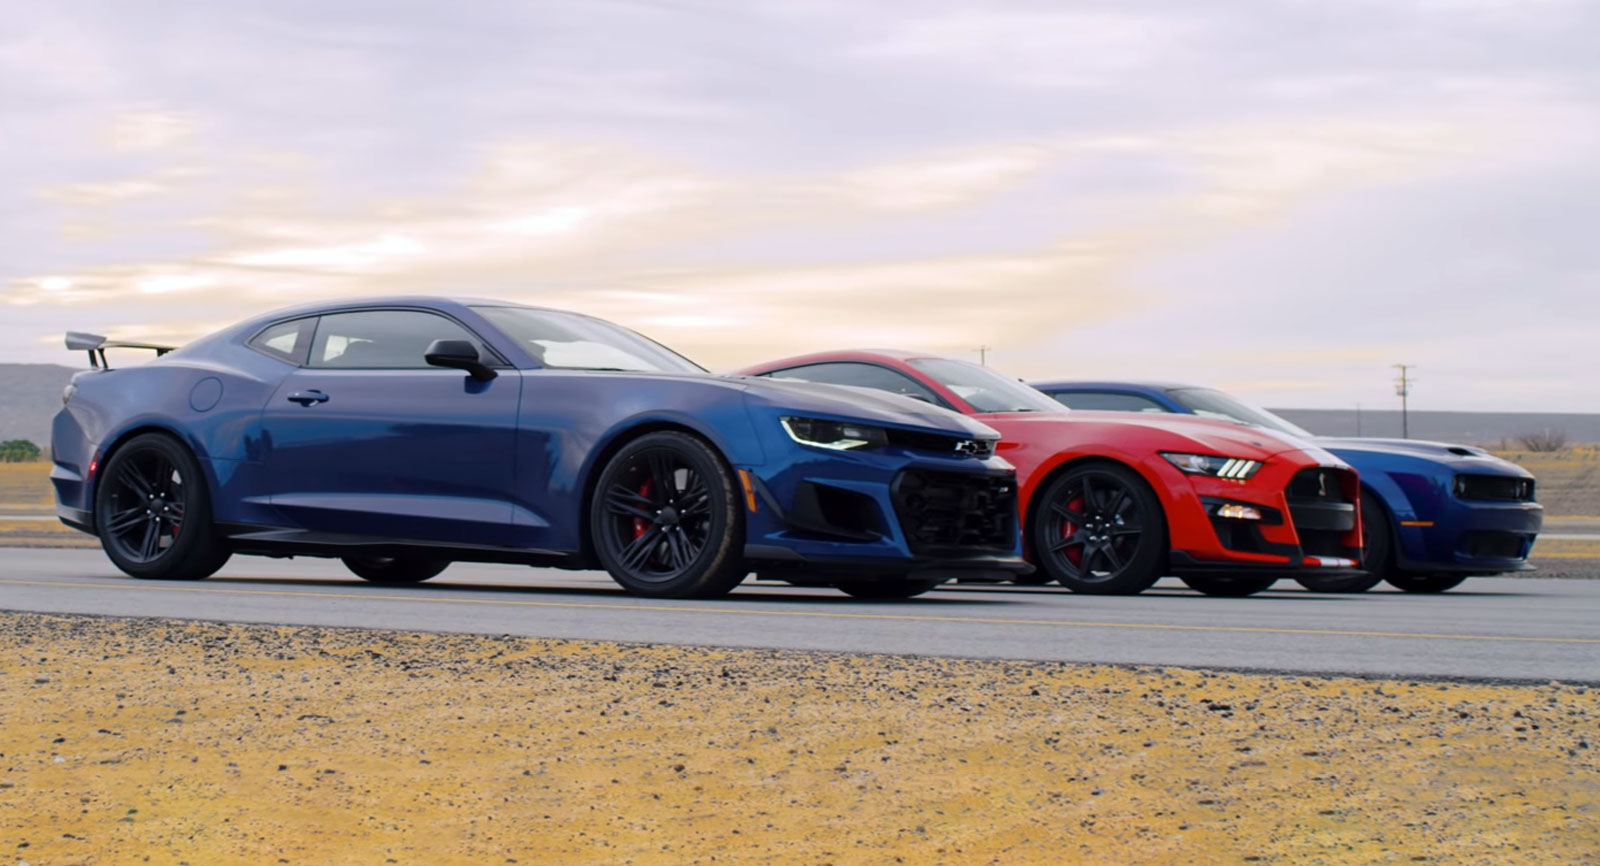 Mustang Shelby GT500 Takes On Camaro ZL1 1LE And Challenger Hellcat Redeye  | Carscoops